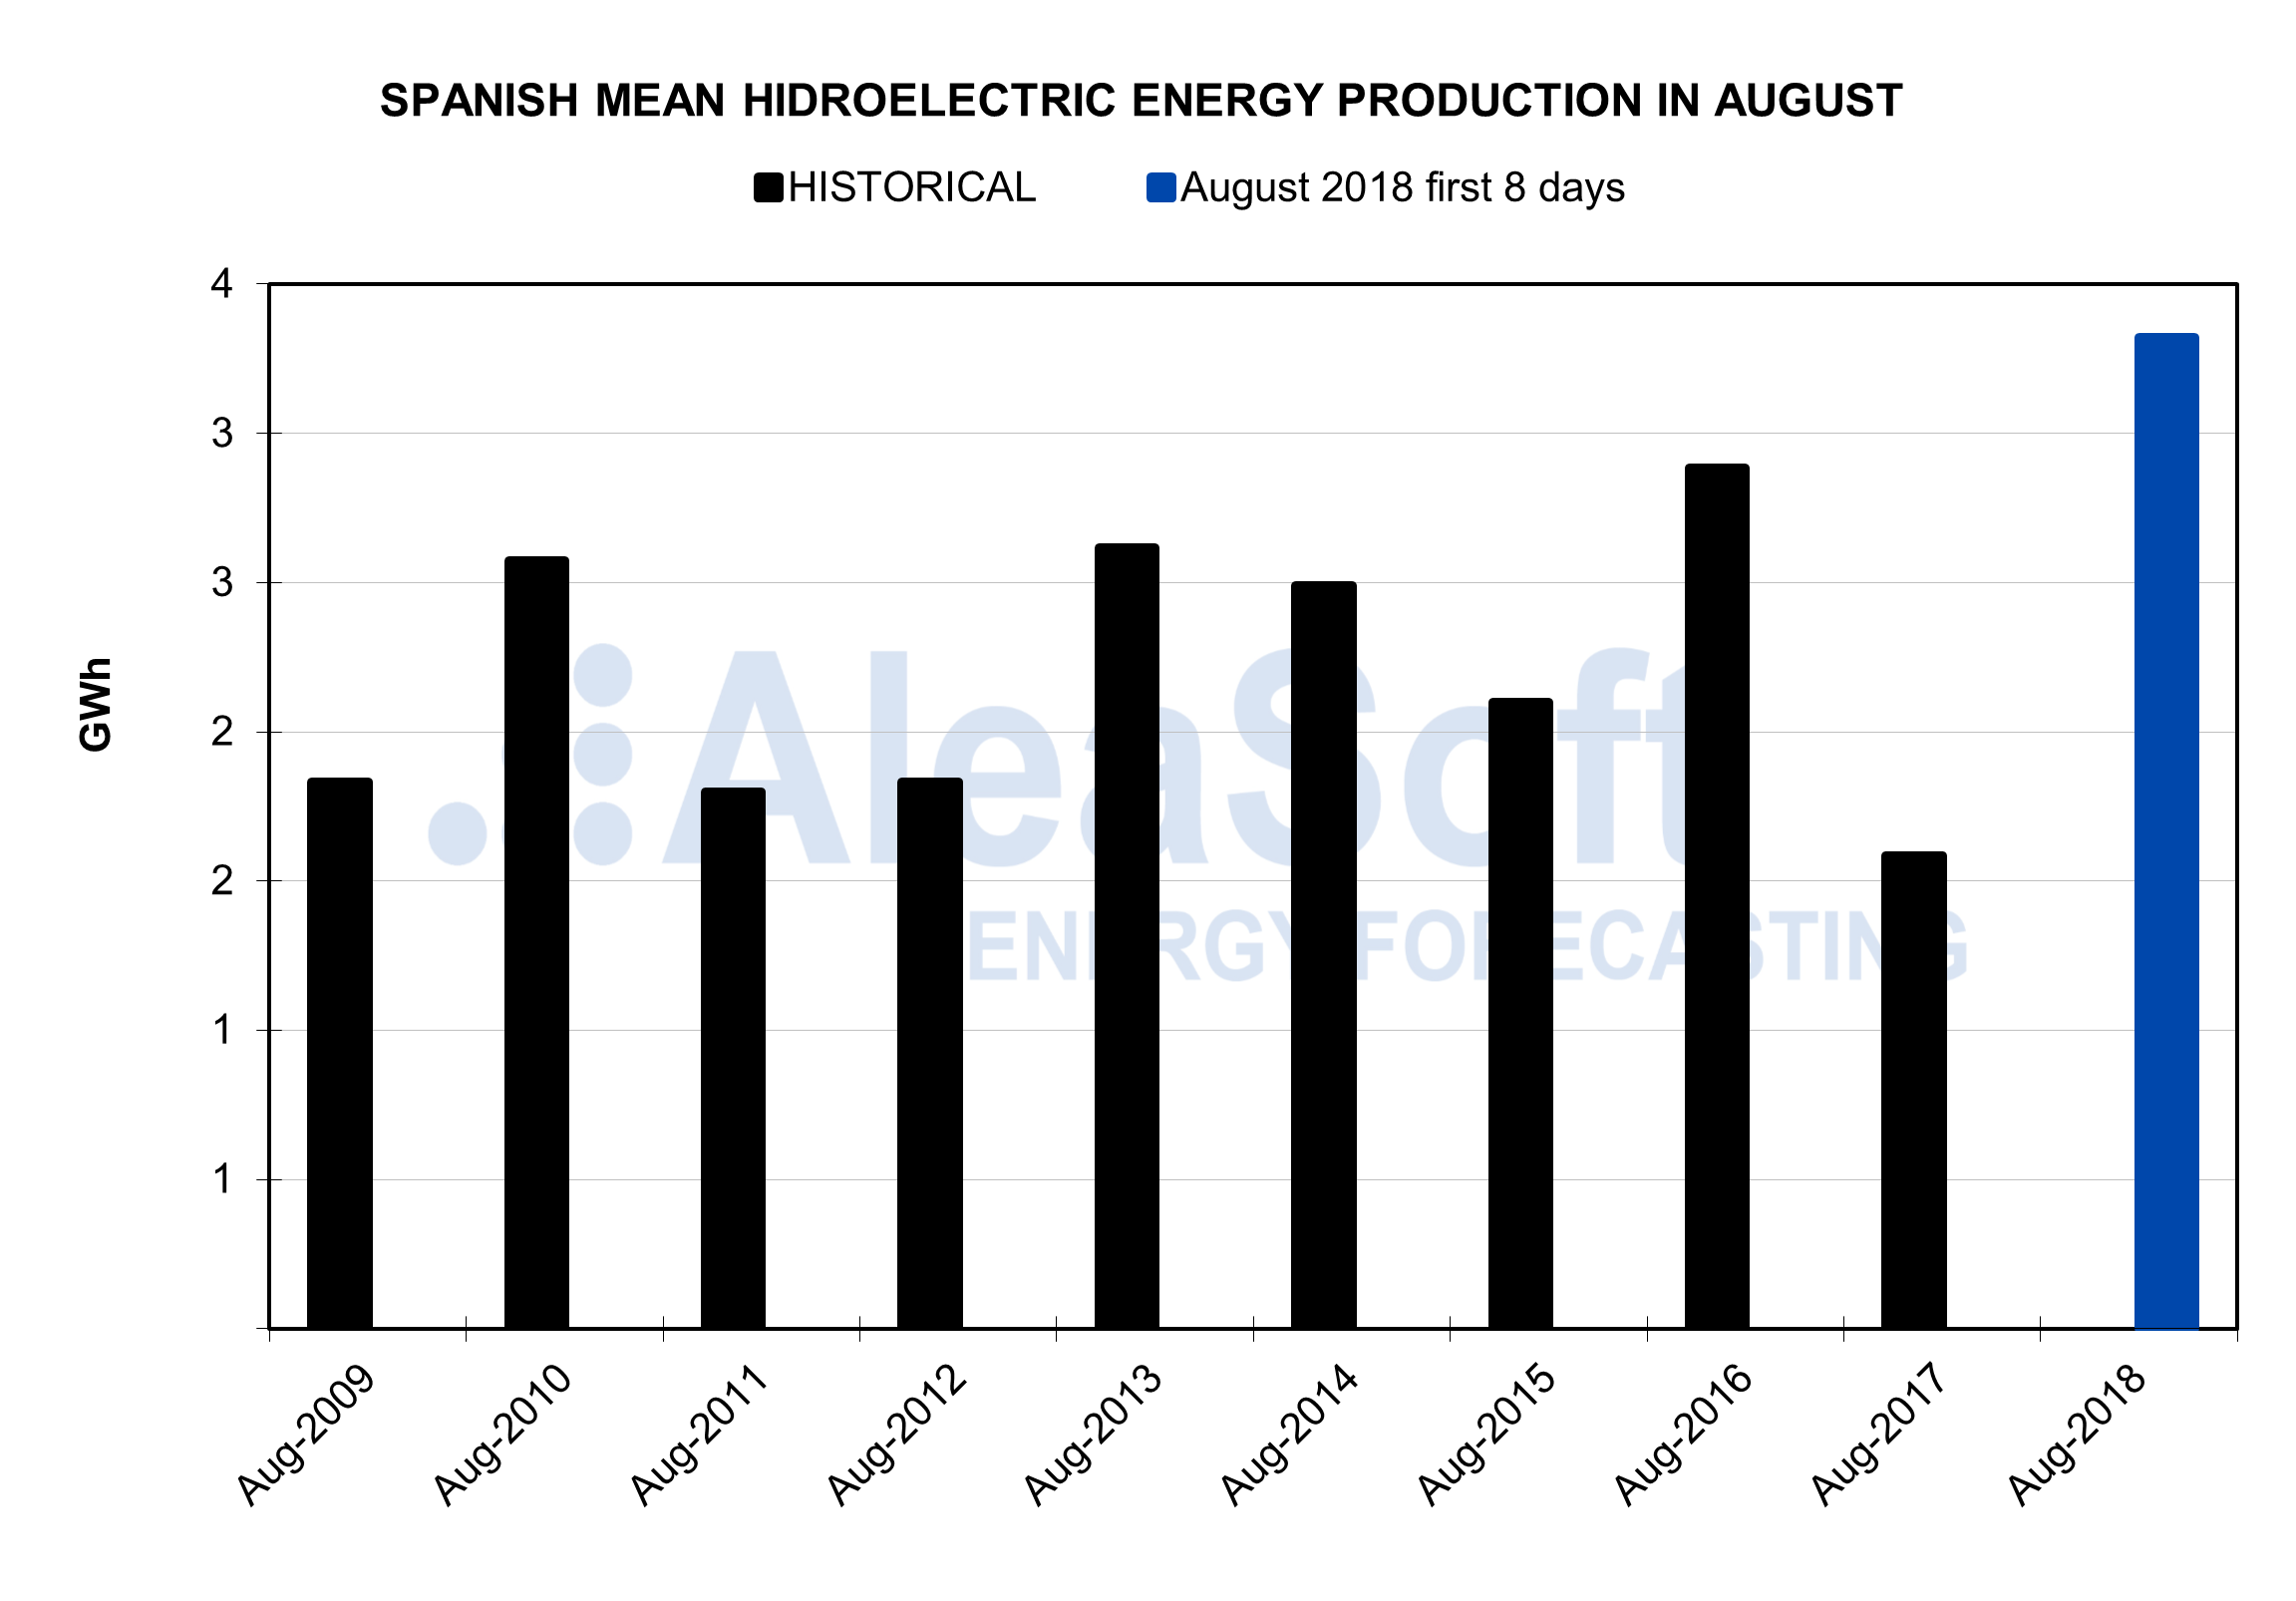 AleaSoft - Spanish mean hydroelectric energy production in August